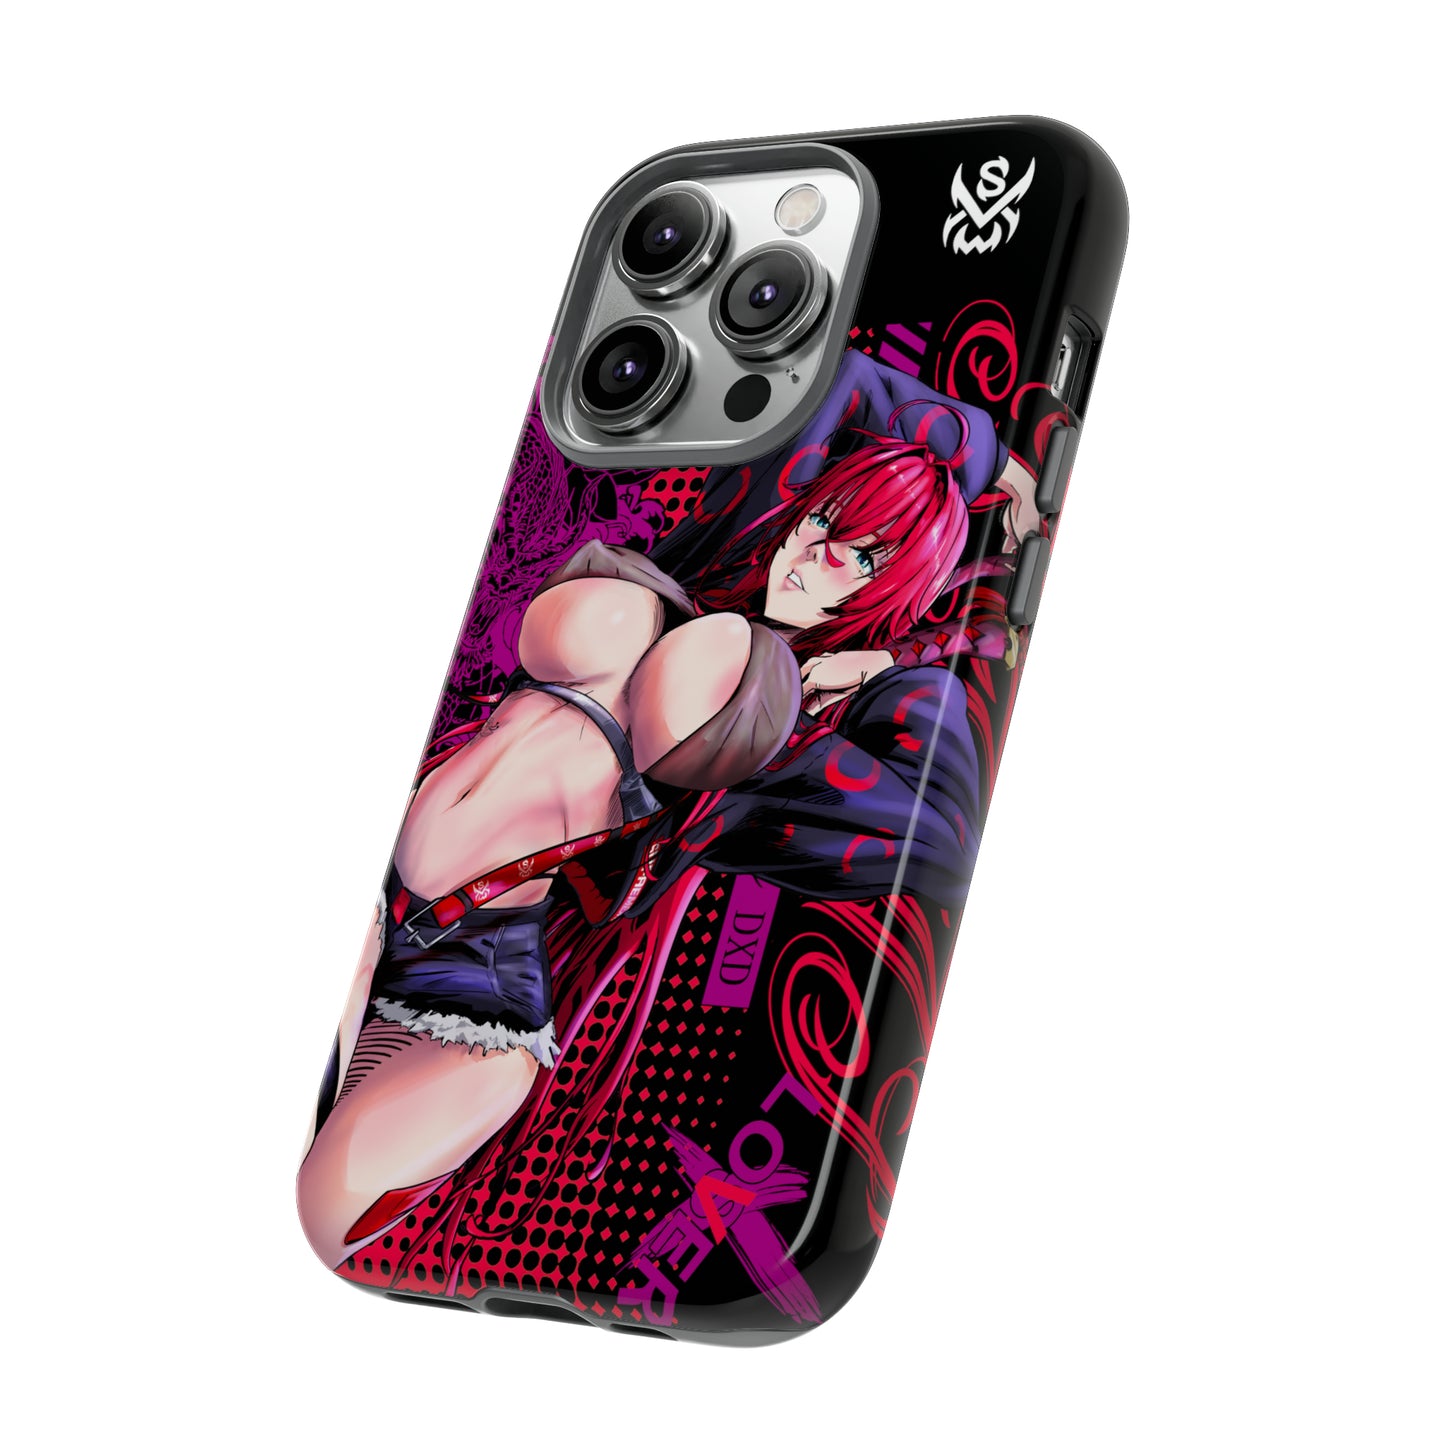 RIAS / iPhone Cases - LIMITED